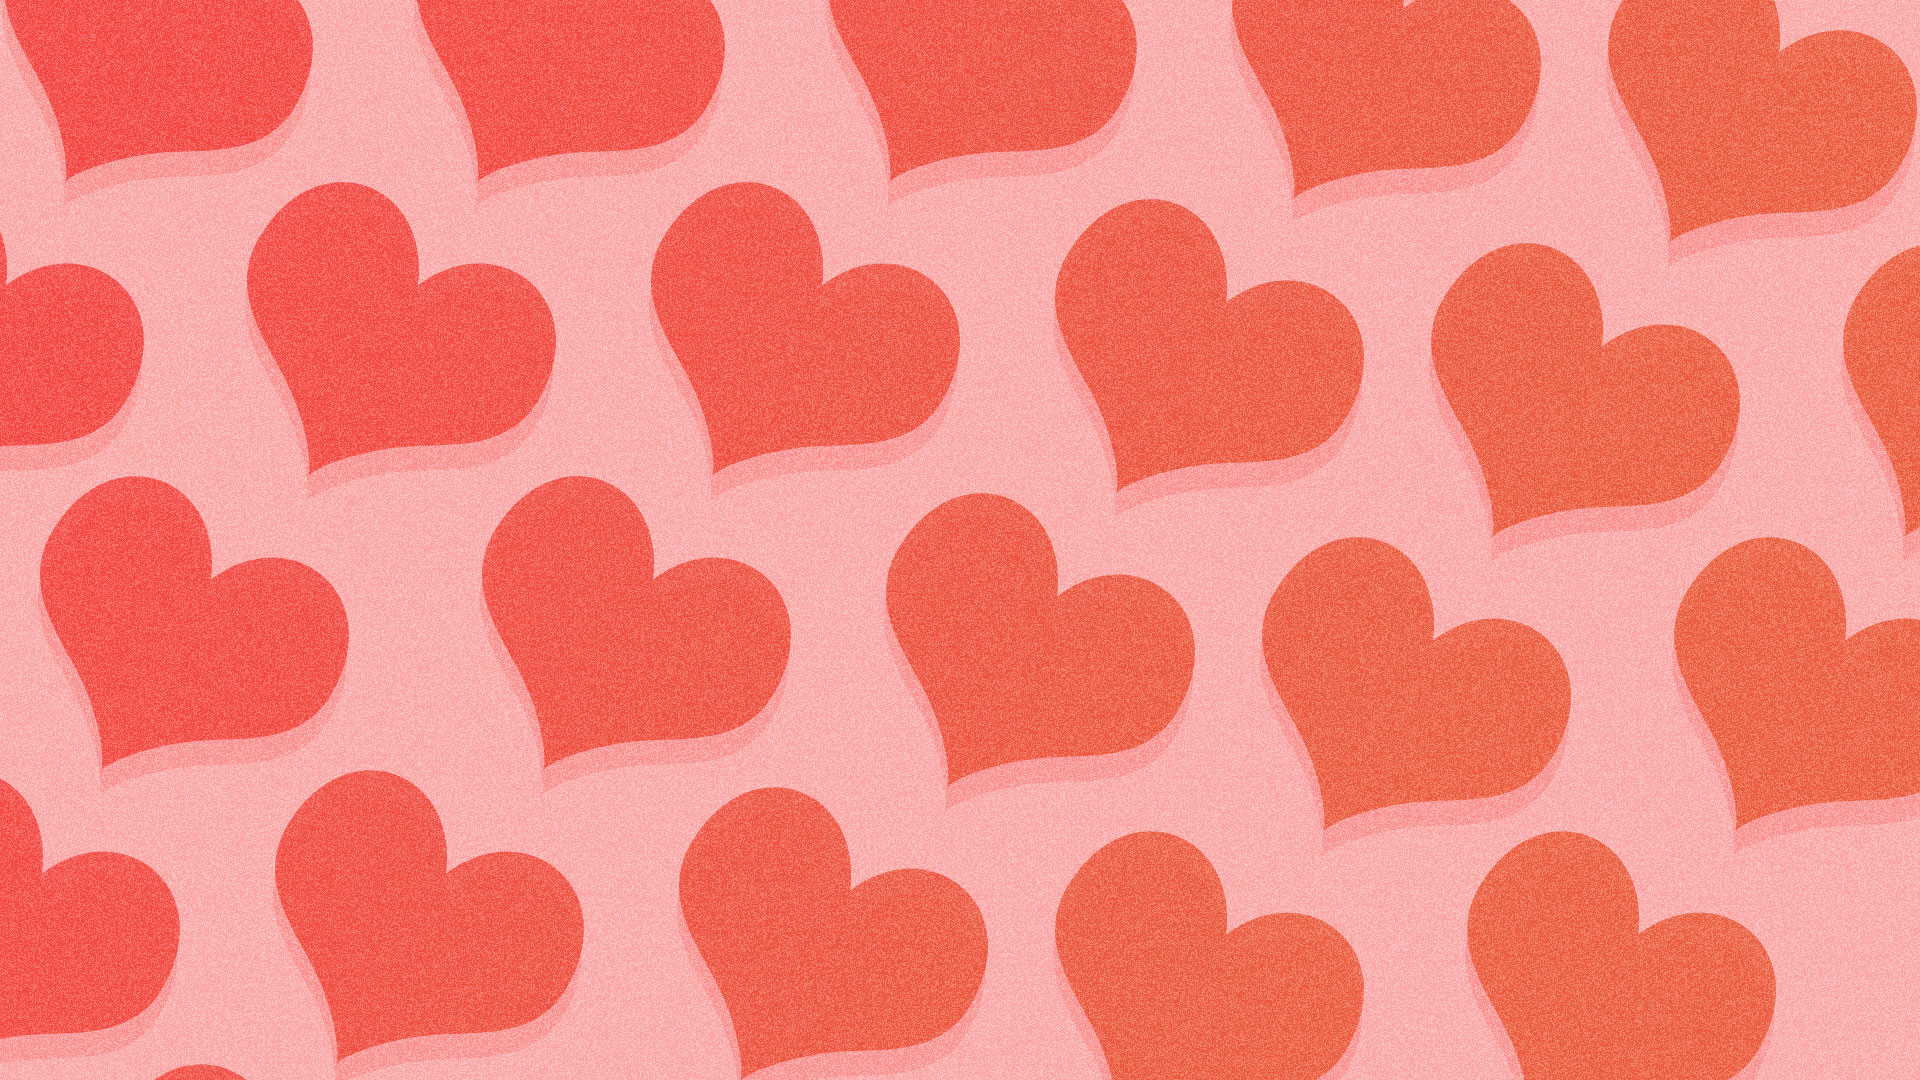 10 Ways to Show your Candidates & Clients Some Love This Valentine’s Day! ❤️